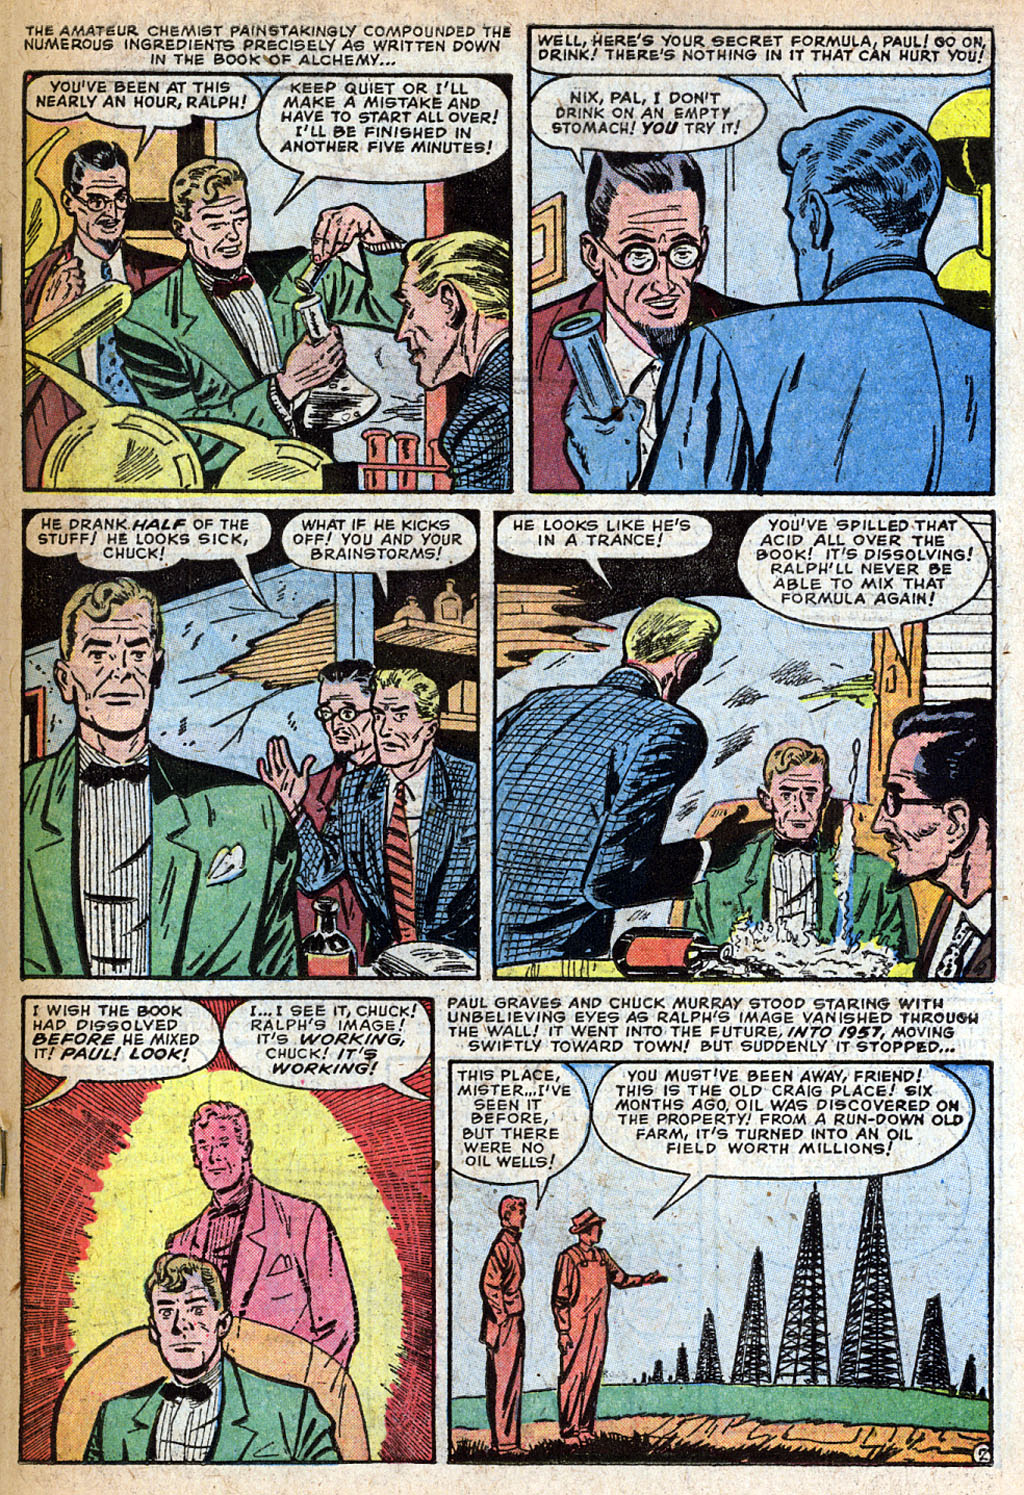 Marvel Tales (1949) 156 Page 18